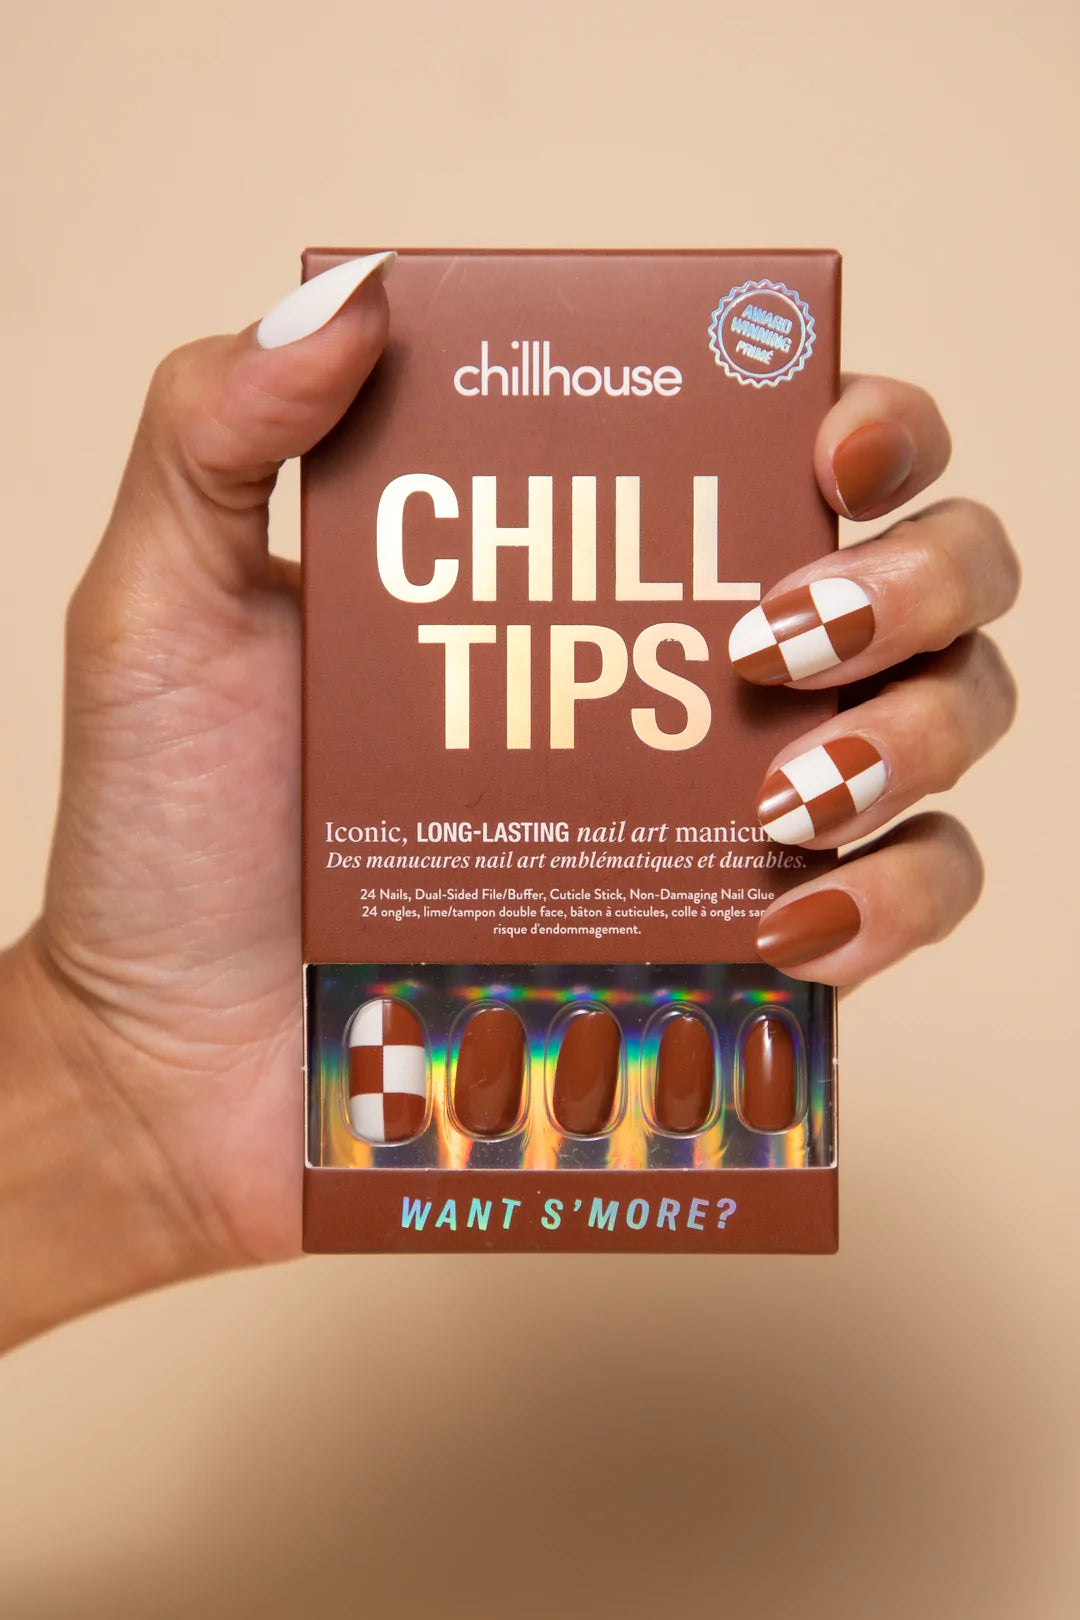 Chillhouse Chill Tips Want S'More? | Prelude & Dawn | Los Angeles, CA